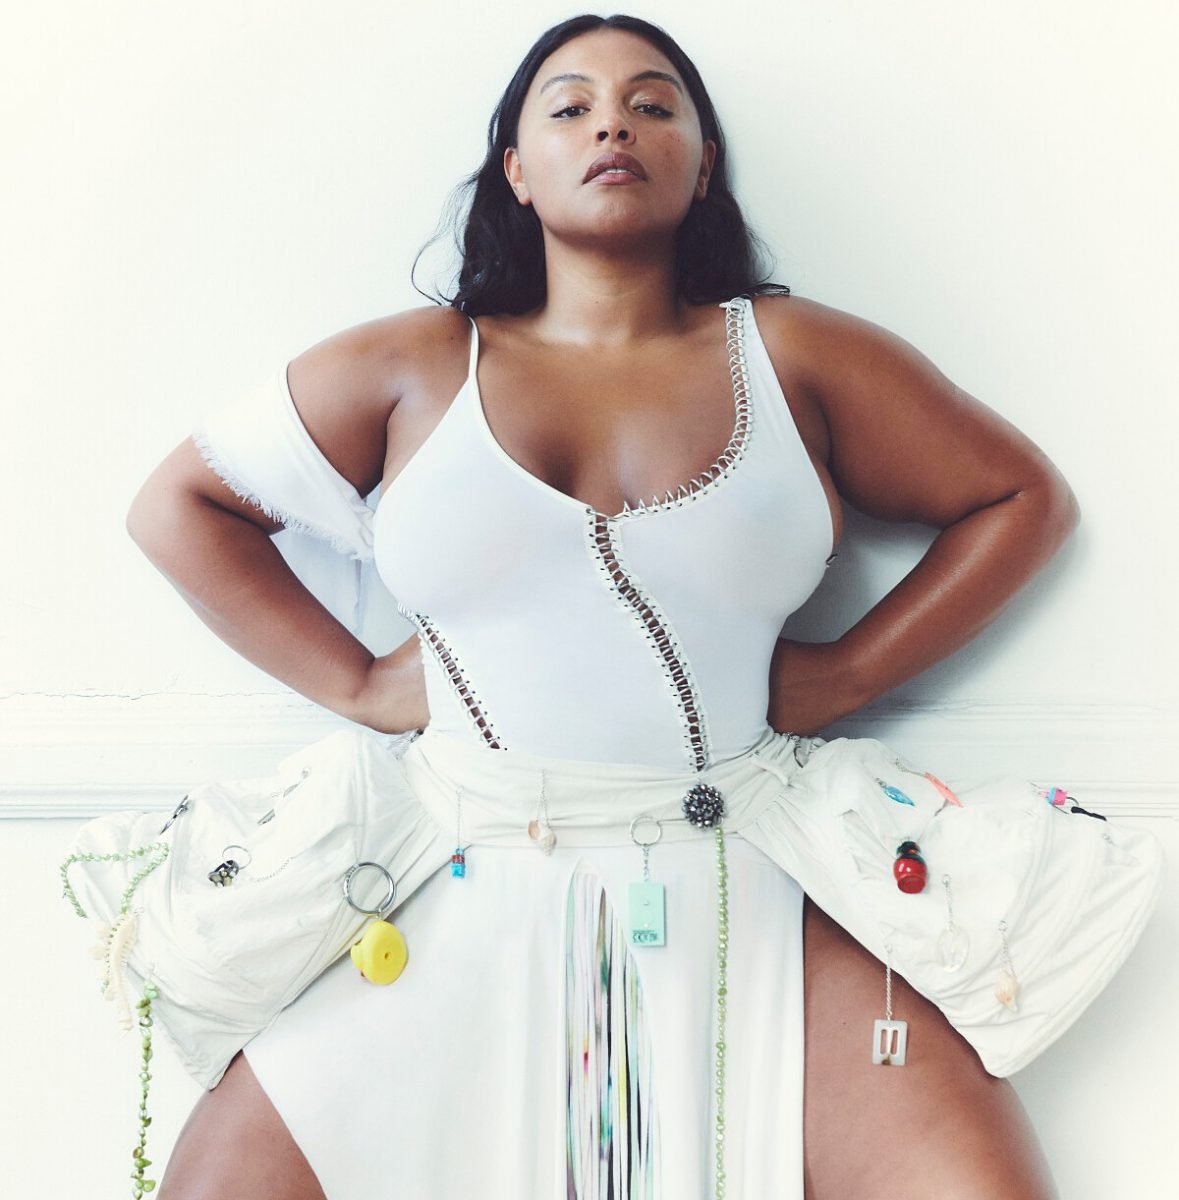 8 Plus-Size Models Reshaping the Fashion Industry